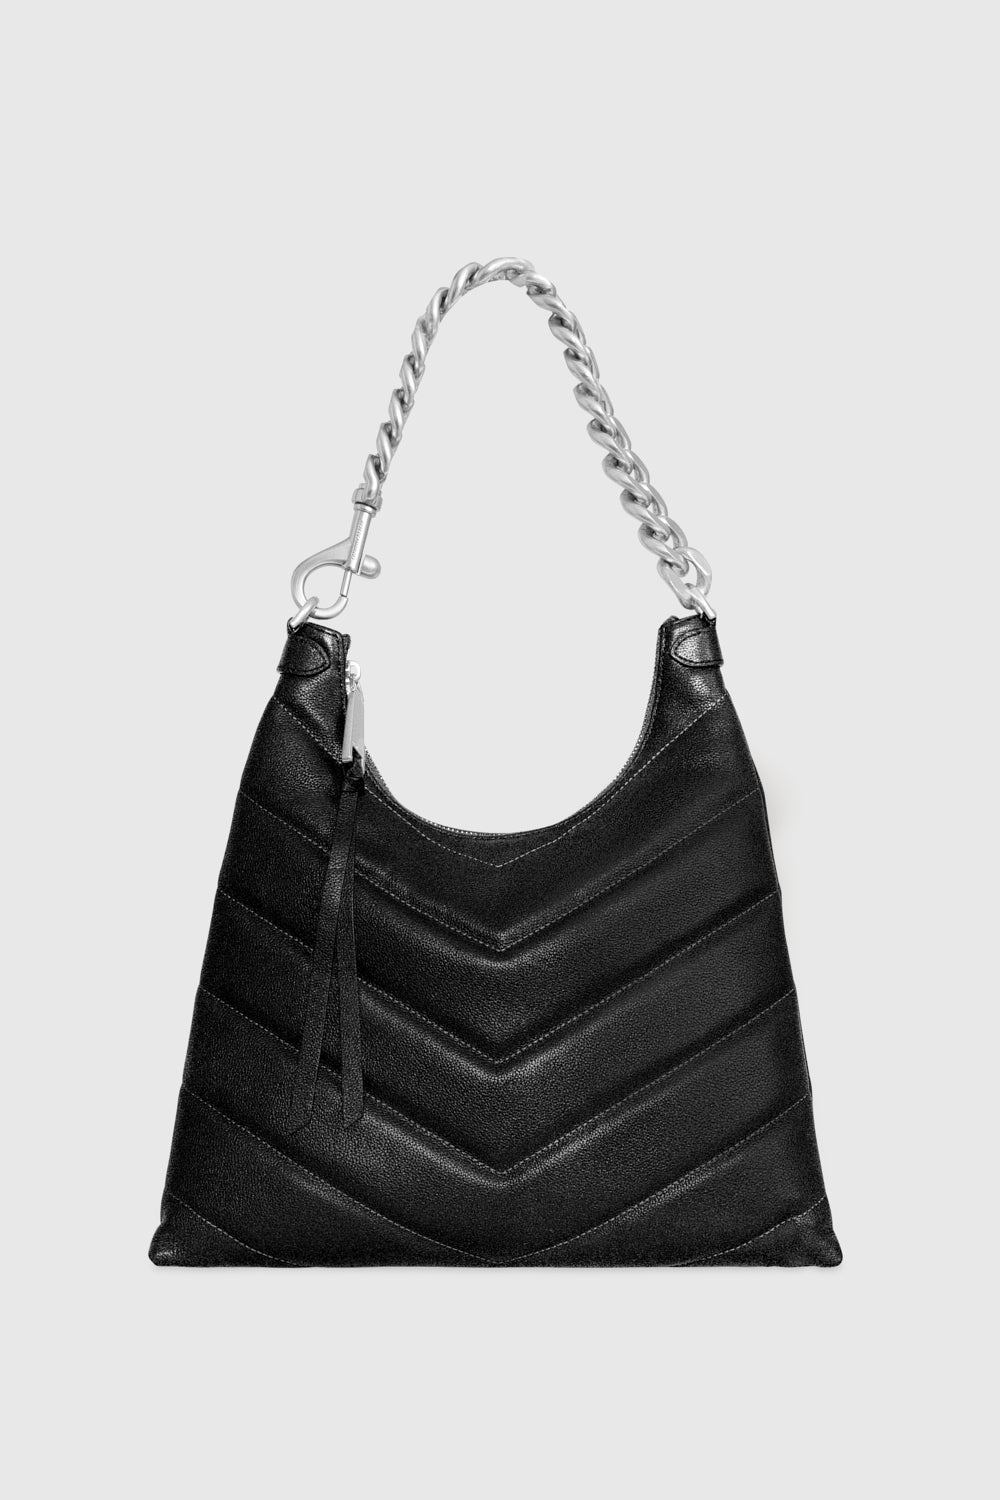 Maxi Hobo Bag - Luxe Finds UK